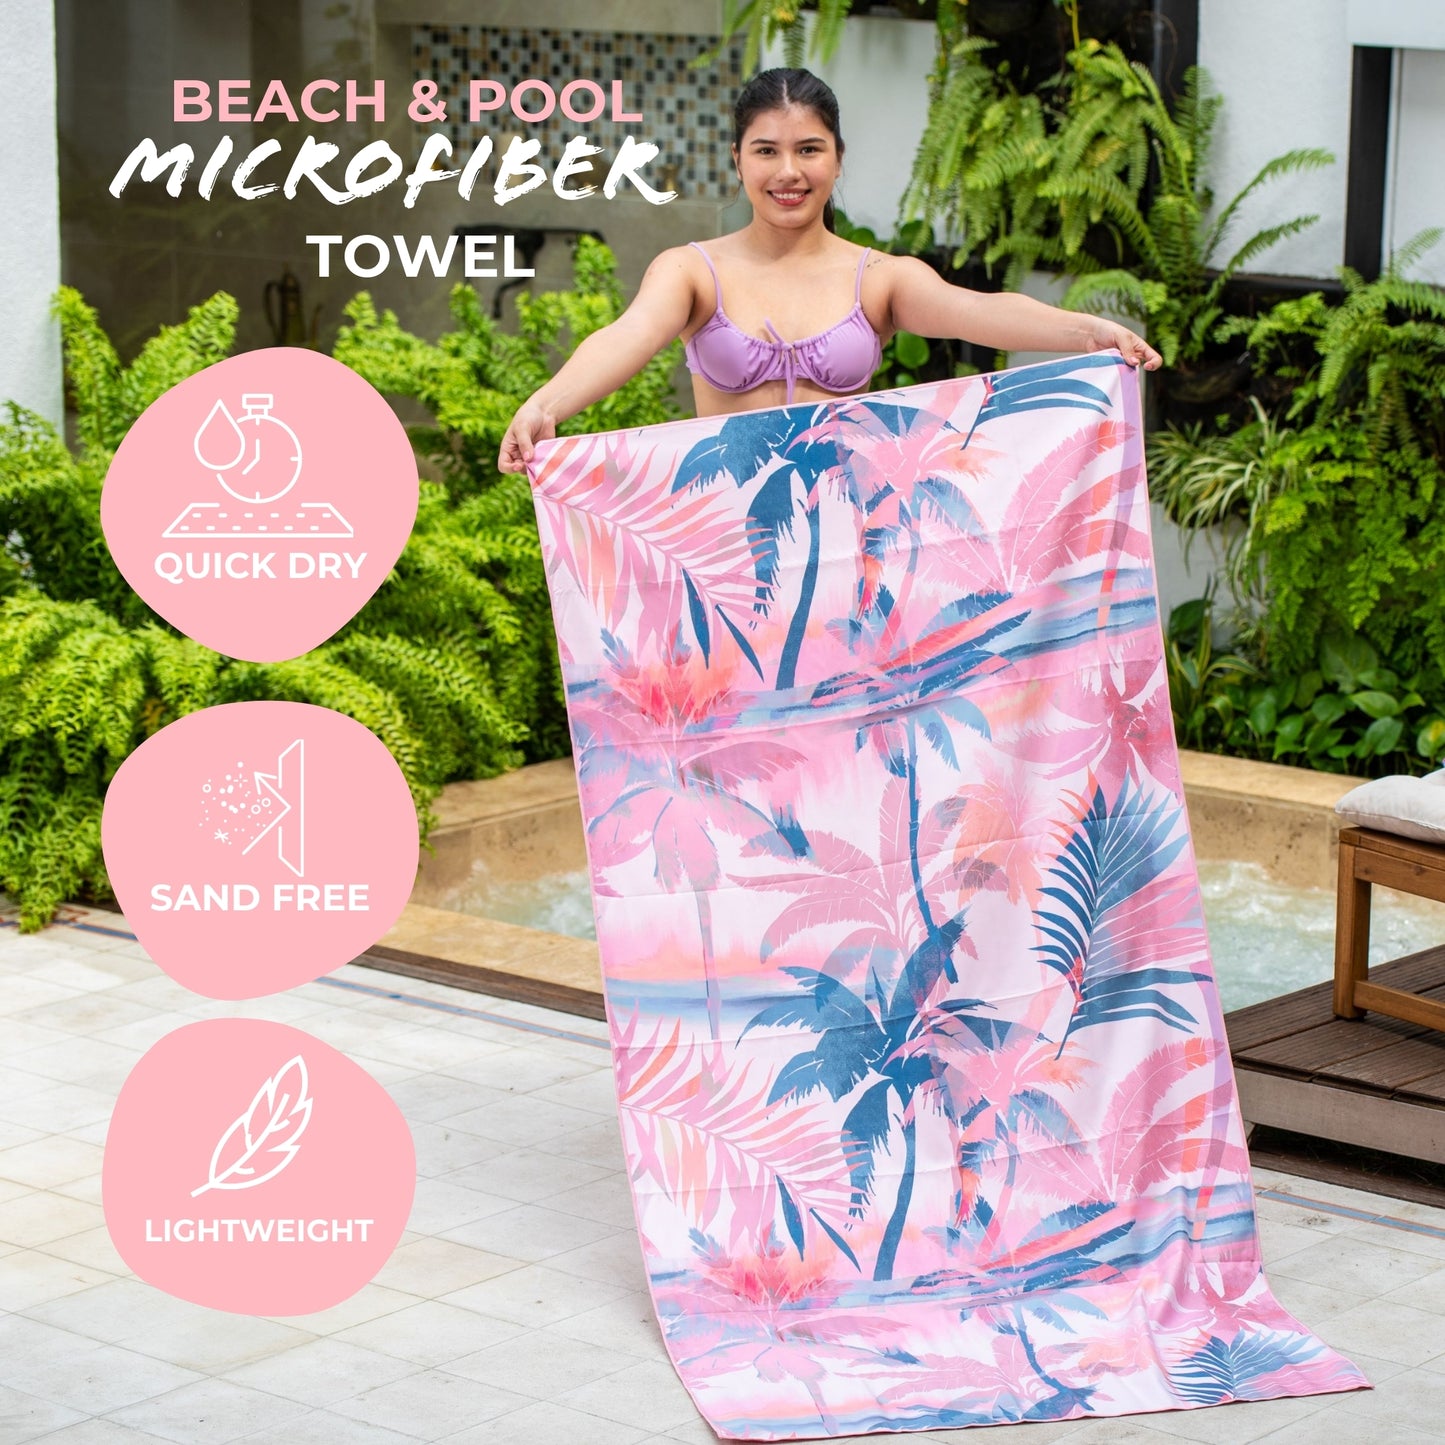 Microfiber Towel for Adults | Extra Large 35" x 70" |  Quick Dry with Pouch, Vesper pink